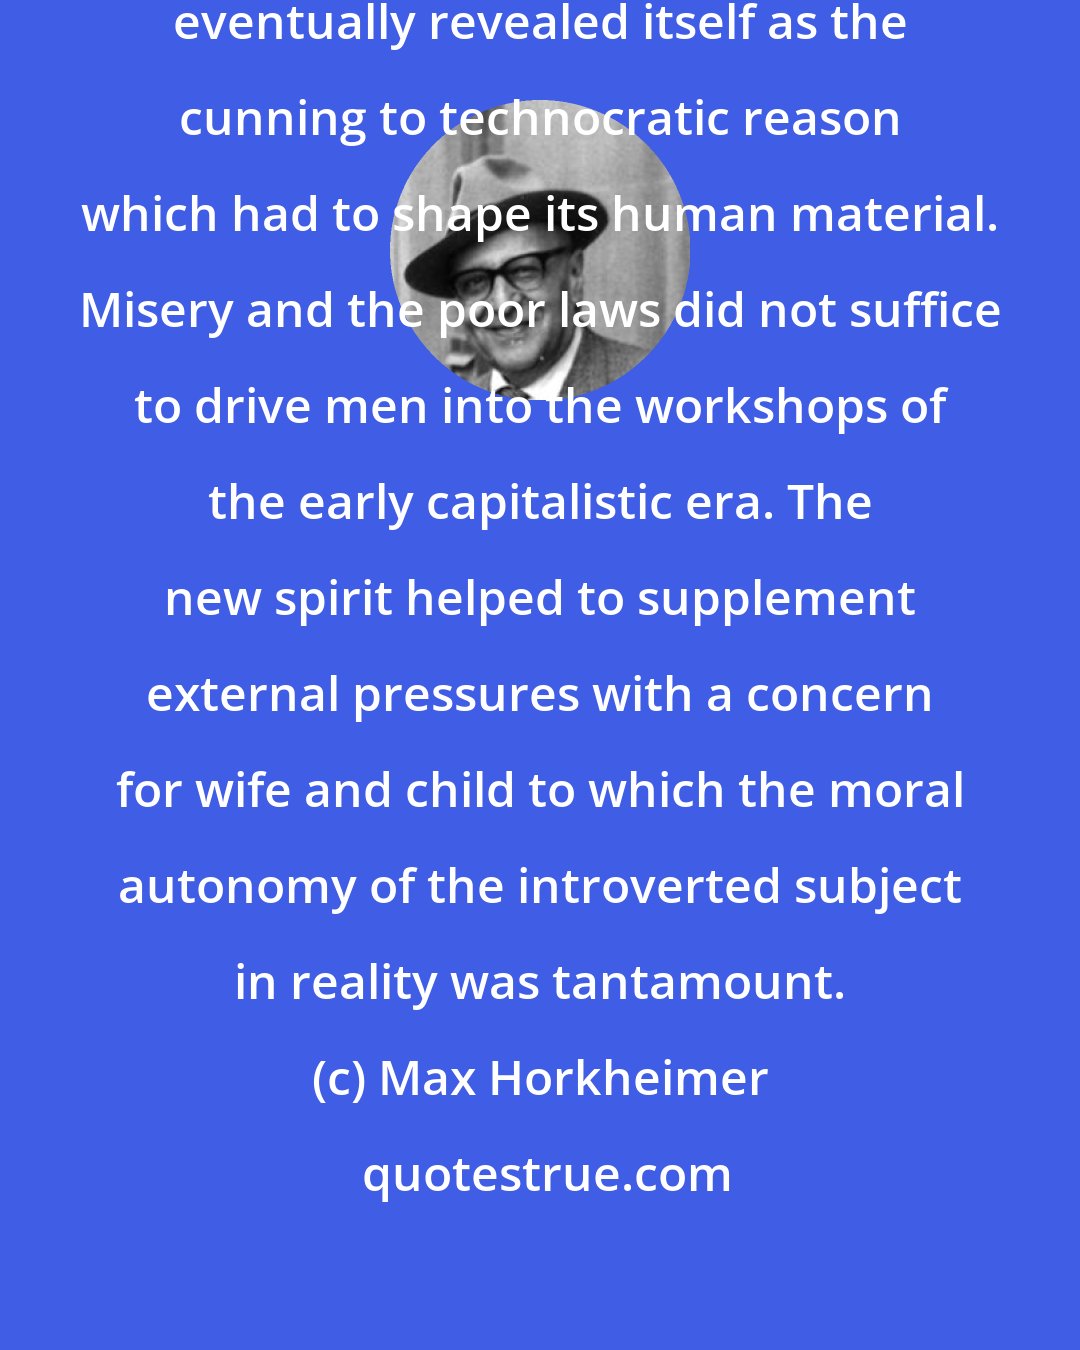 Max Horkheimer: Calvin's theocentric irrationalism eventually revealed itself as the cunning to technocratic reason which had to shape its human material. Misery and the poor laws did not suffice to drive men into the workshops of the early capitalistic era. The new spirit helped to supplement external pressures with a concern for wife and child to which the moral autonomy of the introverted subject in reality was tantamount.